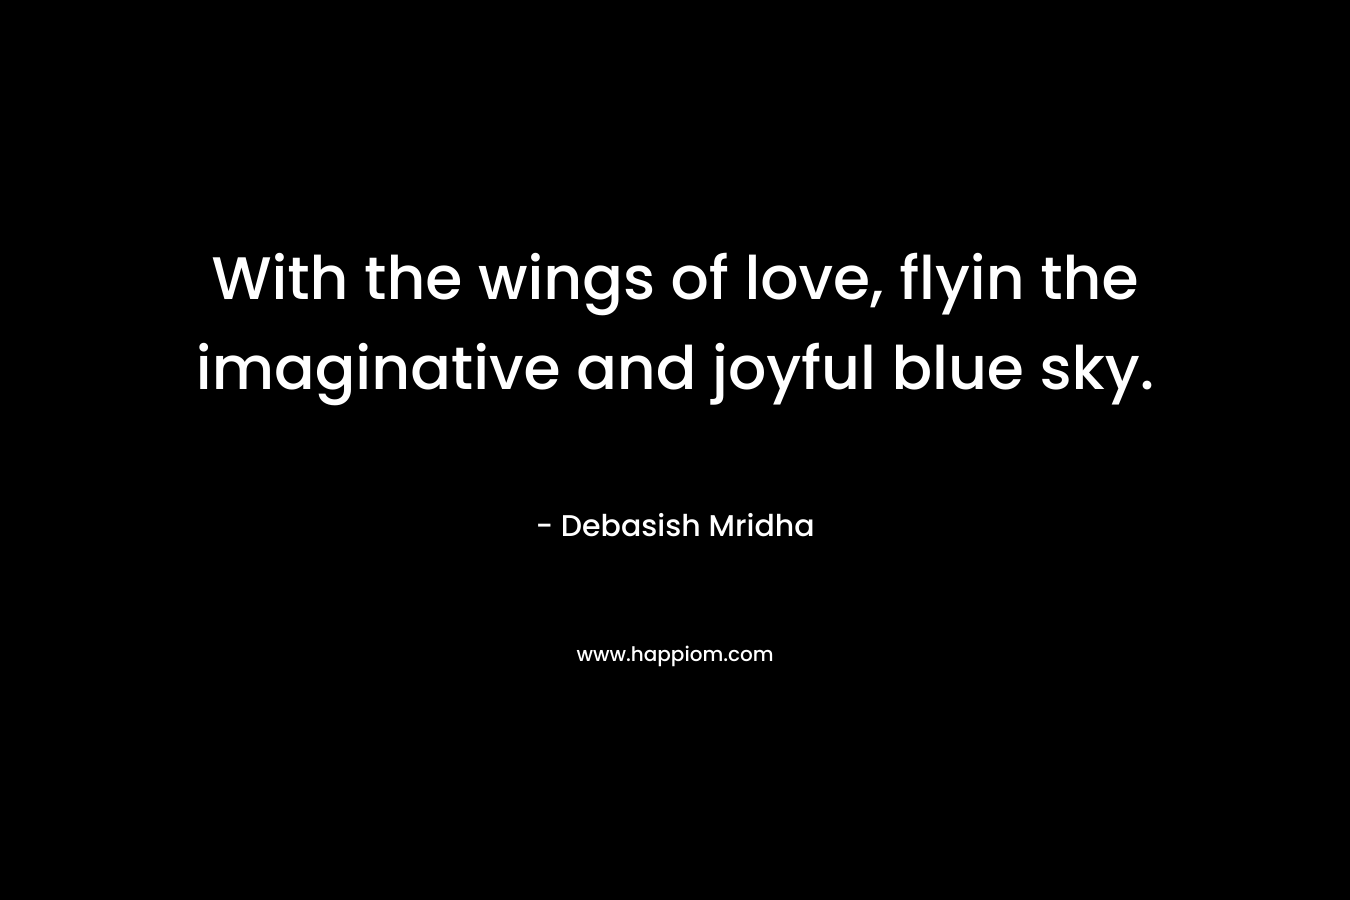 With the wings of love, flyin the imaginative and joyful blue sky.